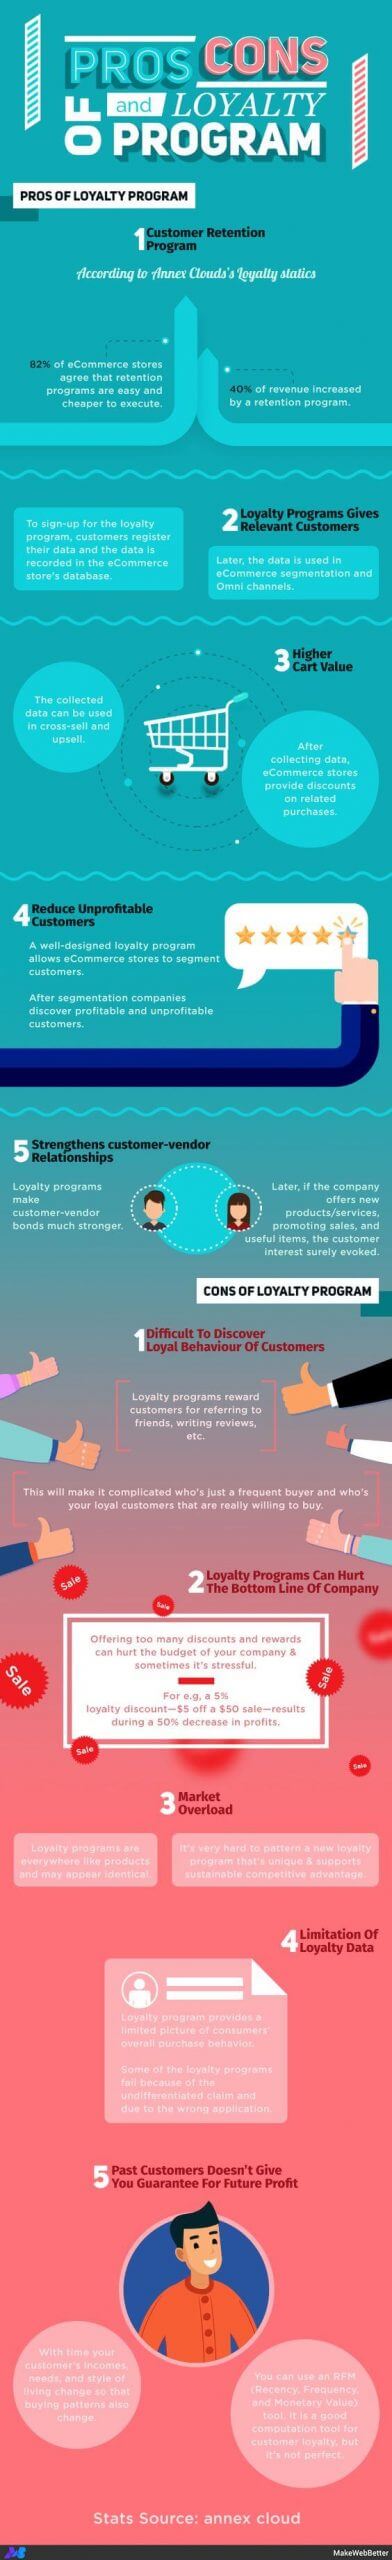 pros cons of loyalty programs